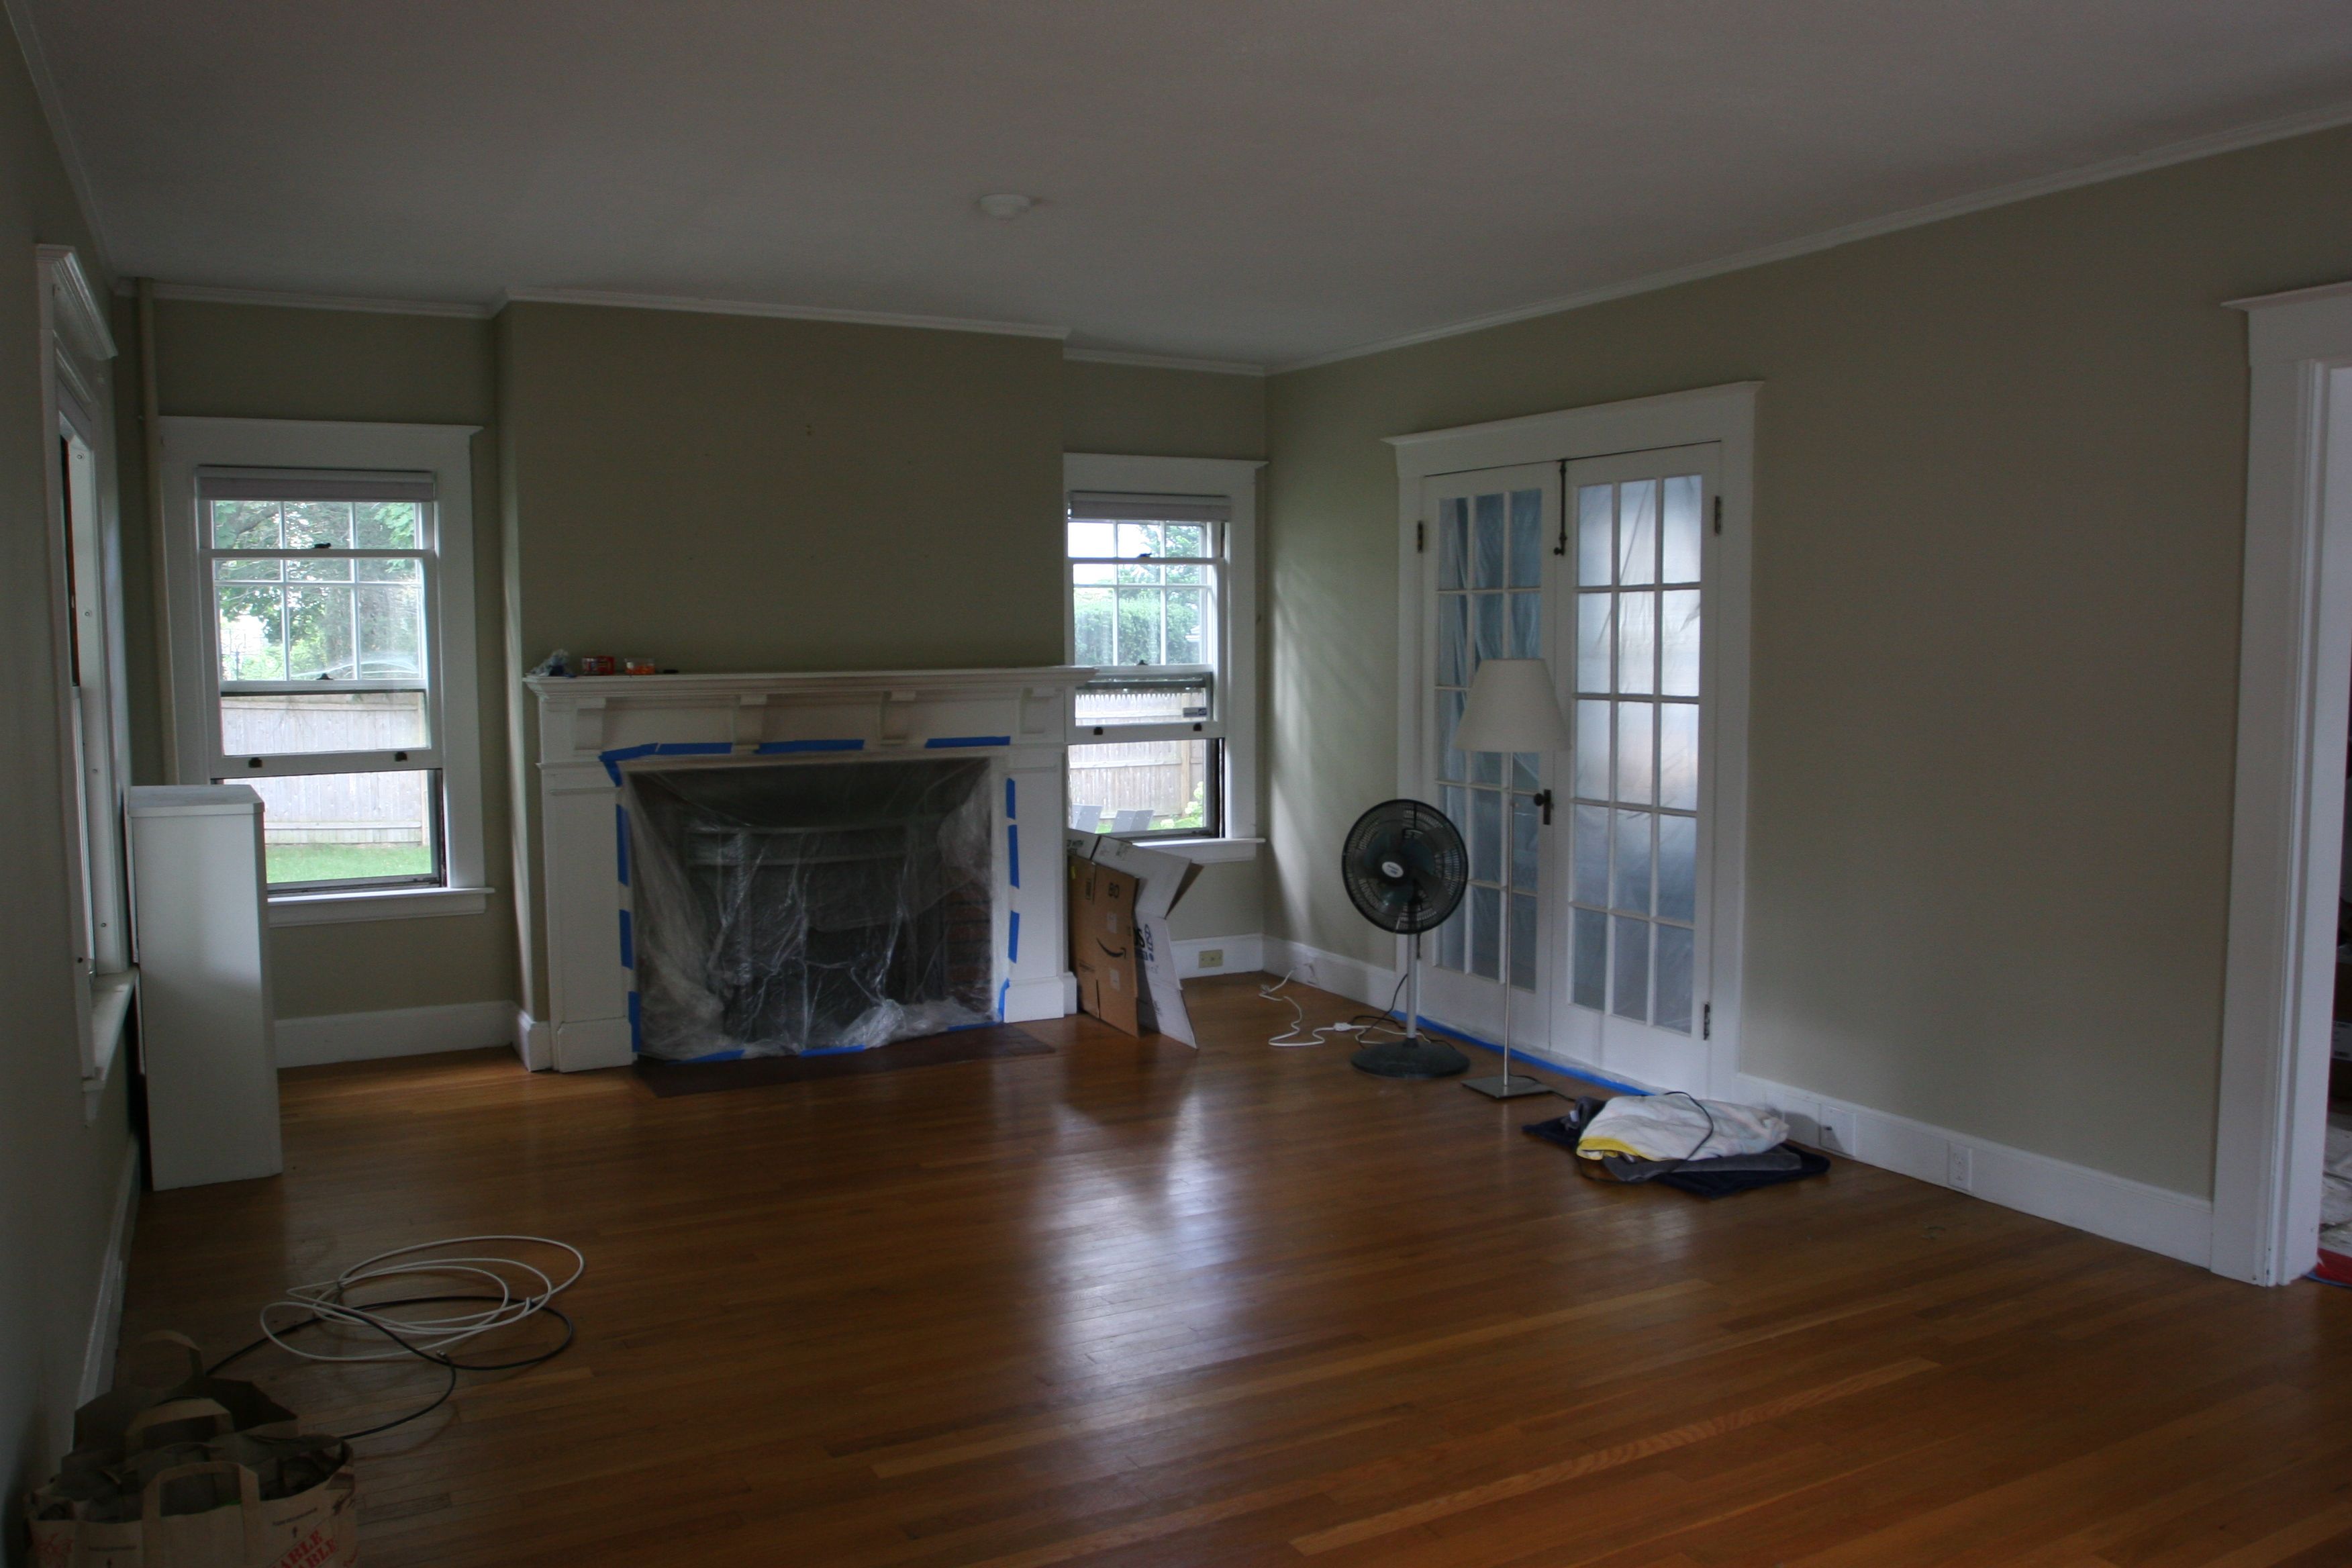 This is what the living room looked like when today began. Sparse, empty-ish, and orange.